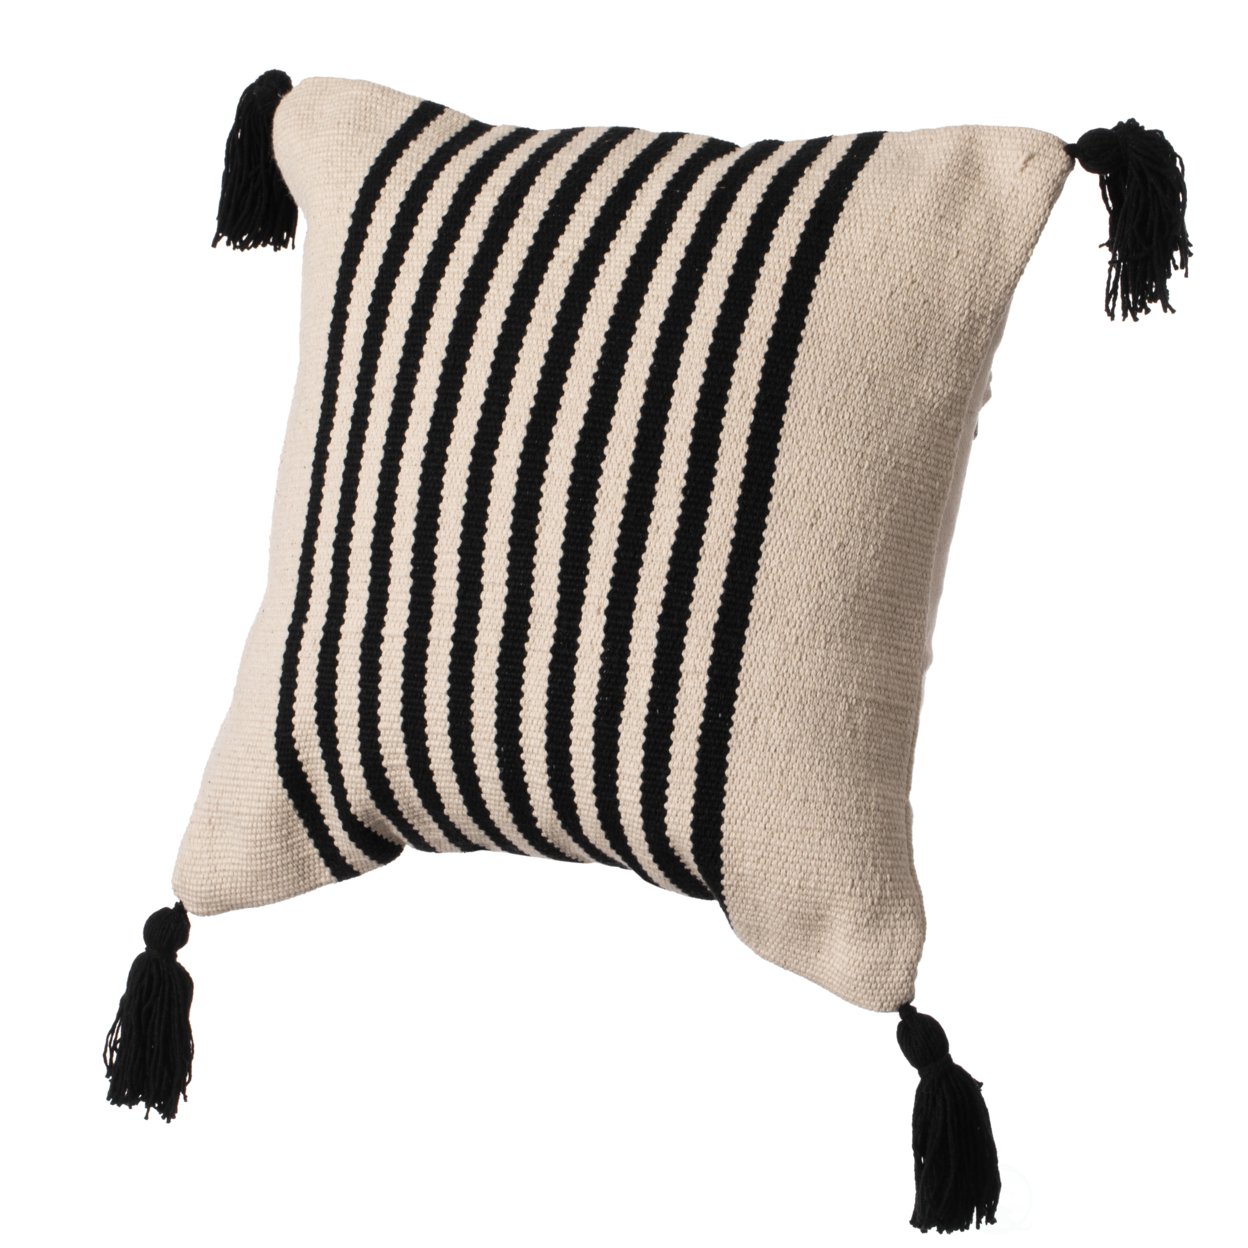 16" Handwoven Cotton Throw Pillow Cover with Striped Lines, Black - black with cushion